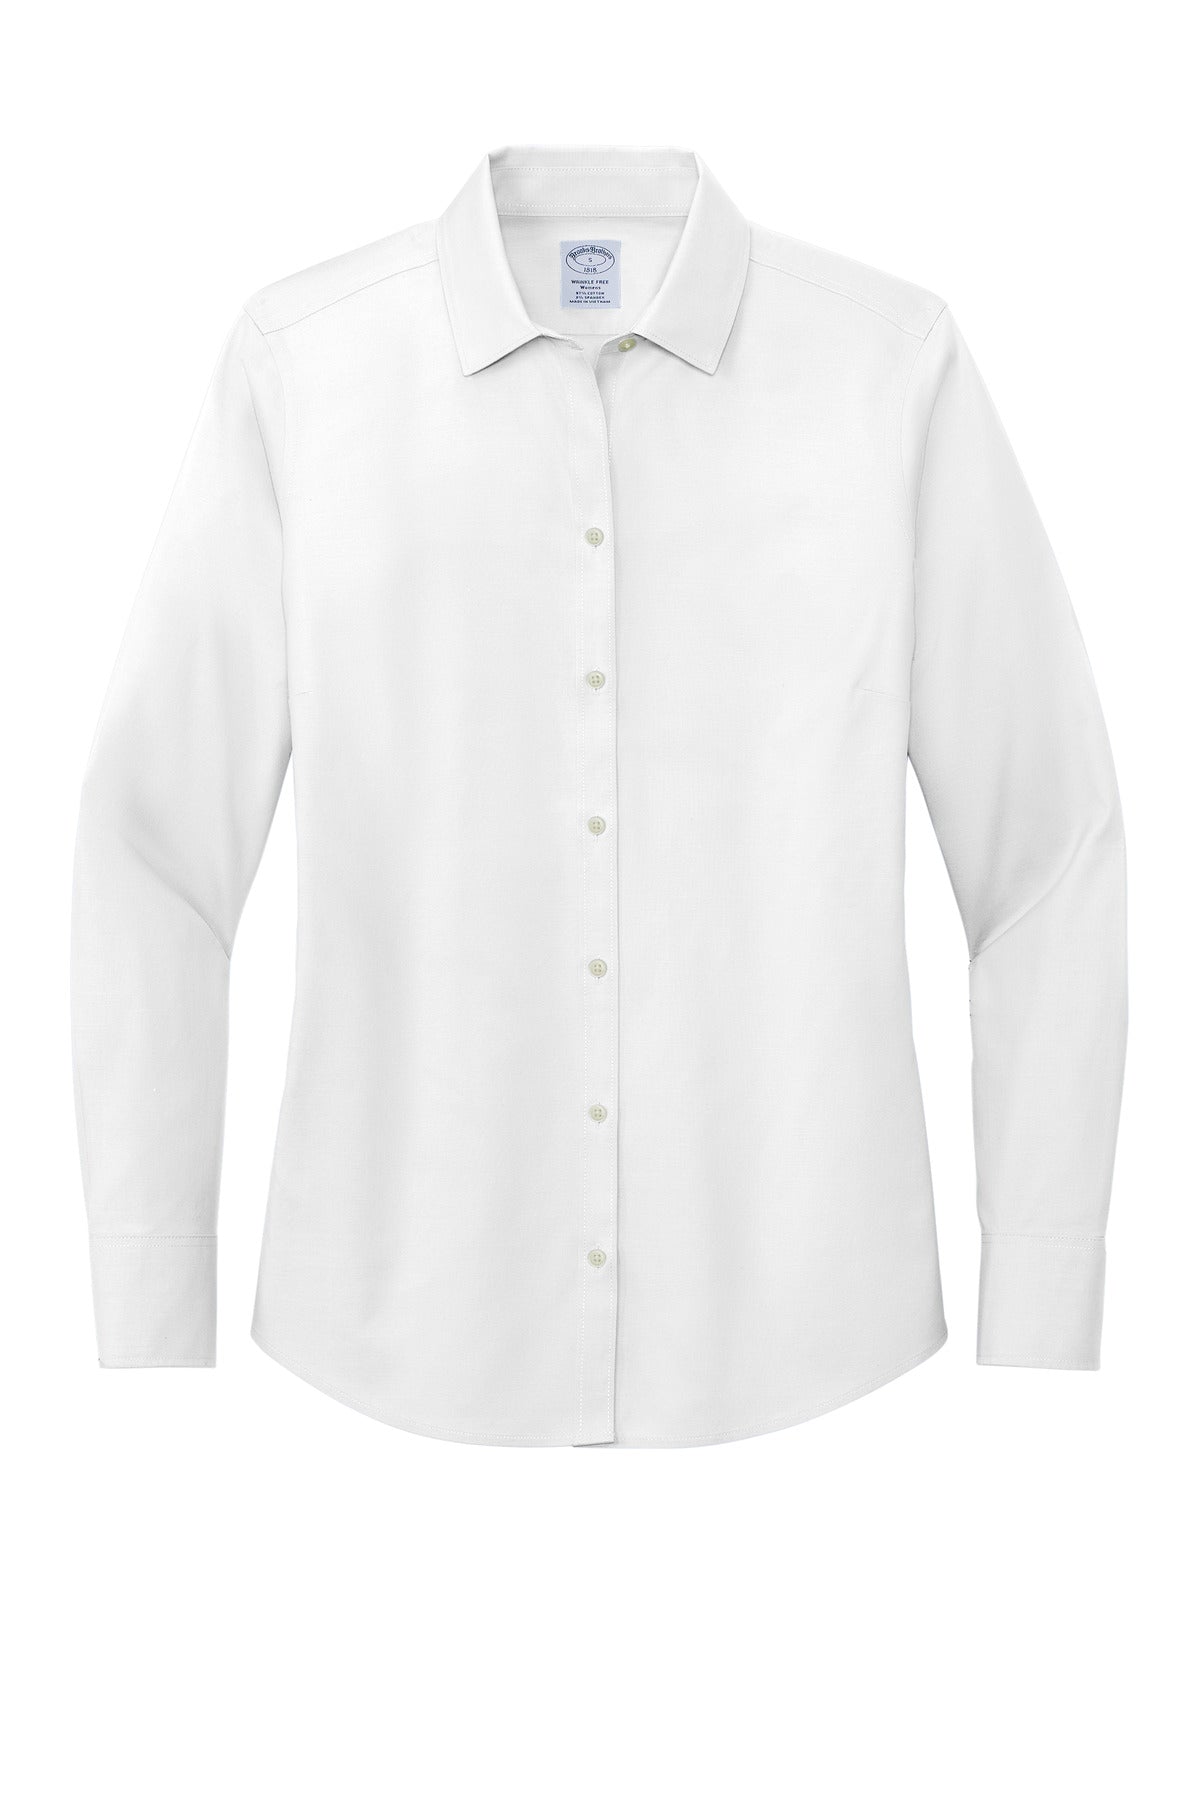 Brooks Brothers Women's Wrinkle-Free Stretch Pinpoint Shirt BB18001